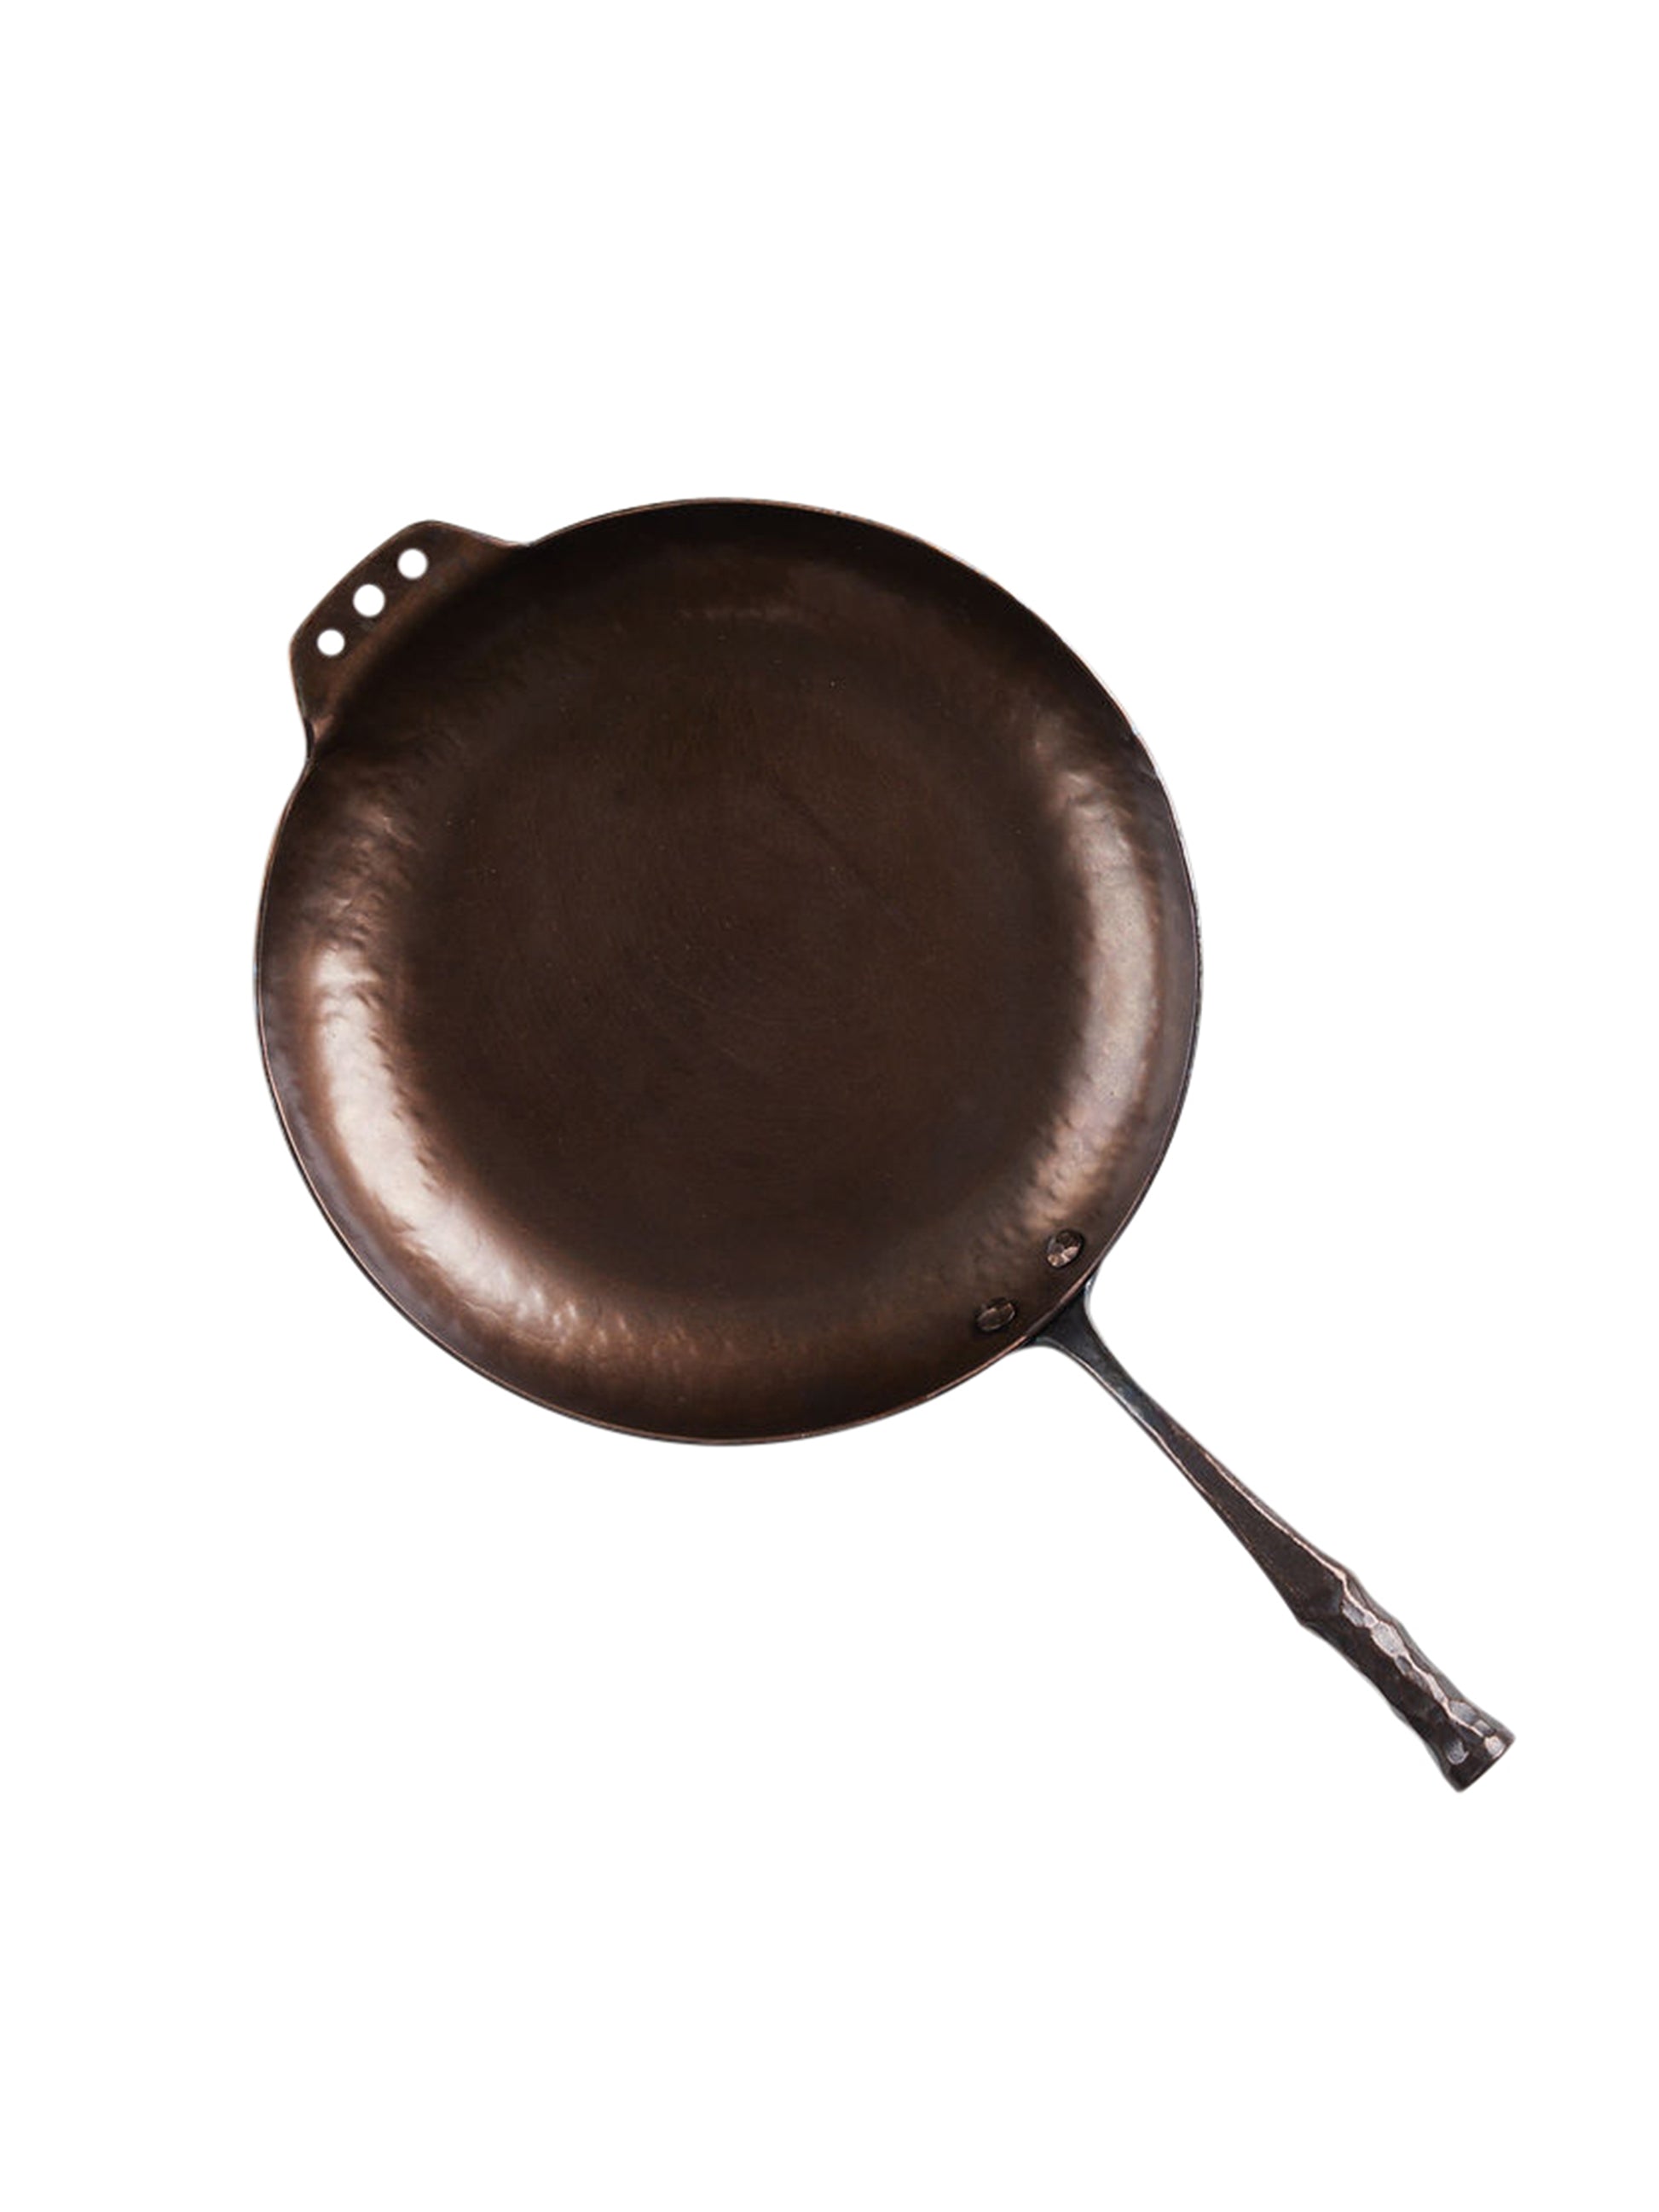 Smithey Farmhouse Skillet, Hand-Forged Carbon Steel, 12 Frying